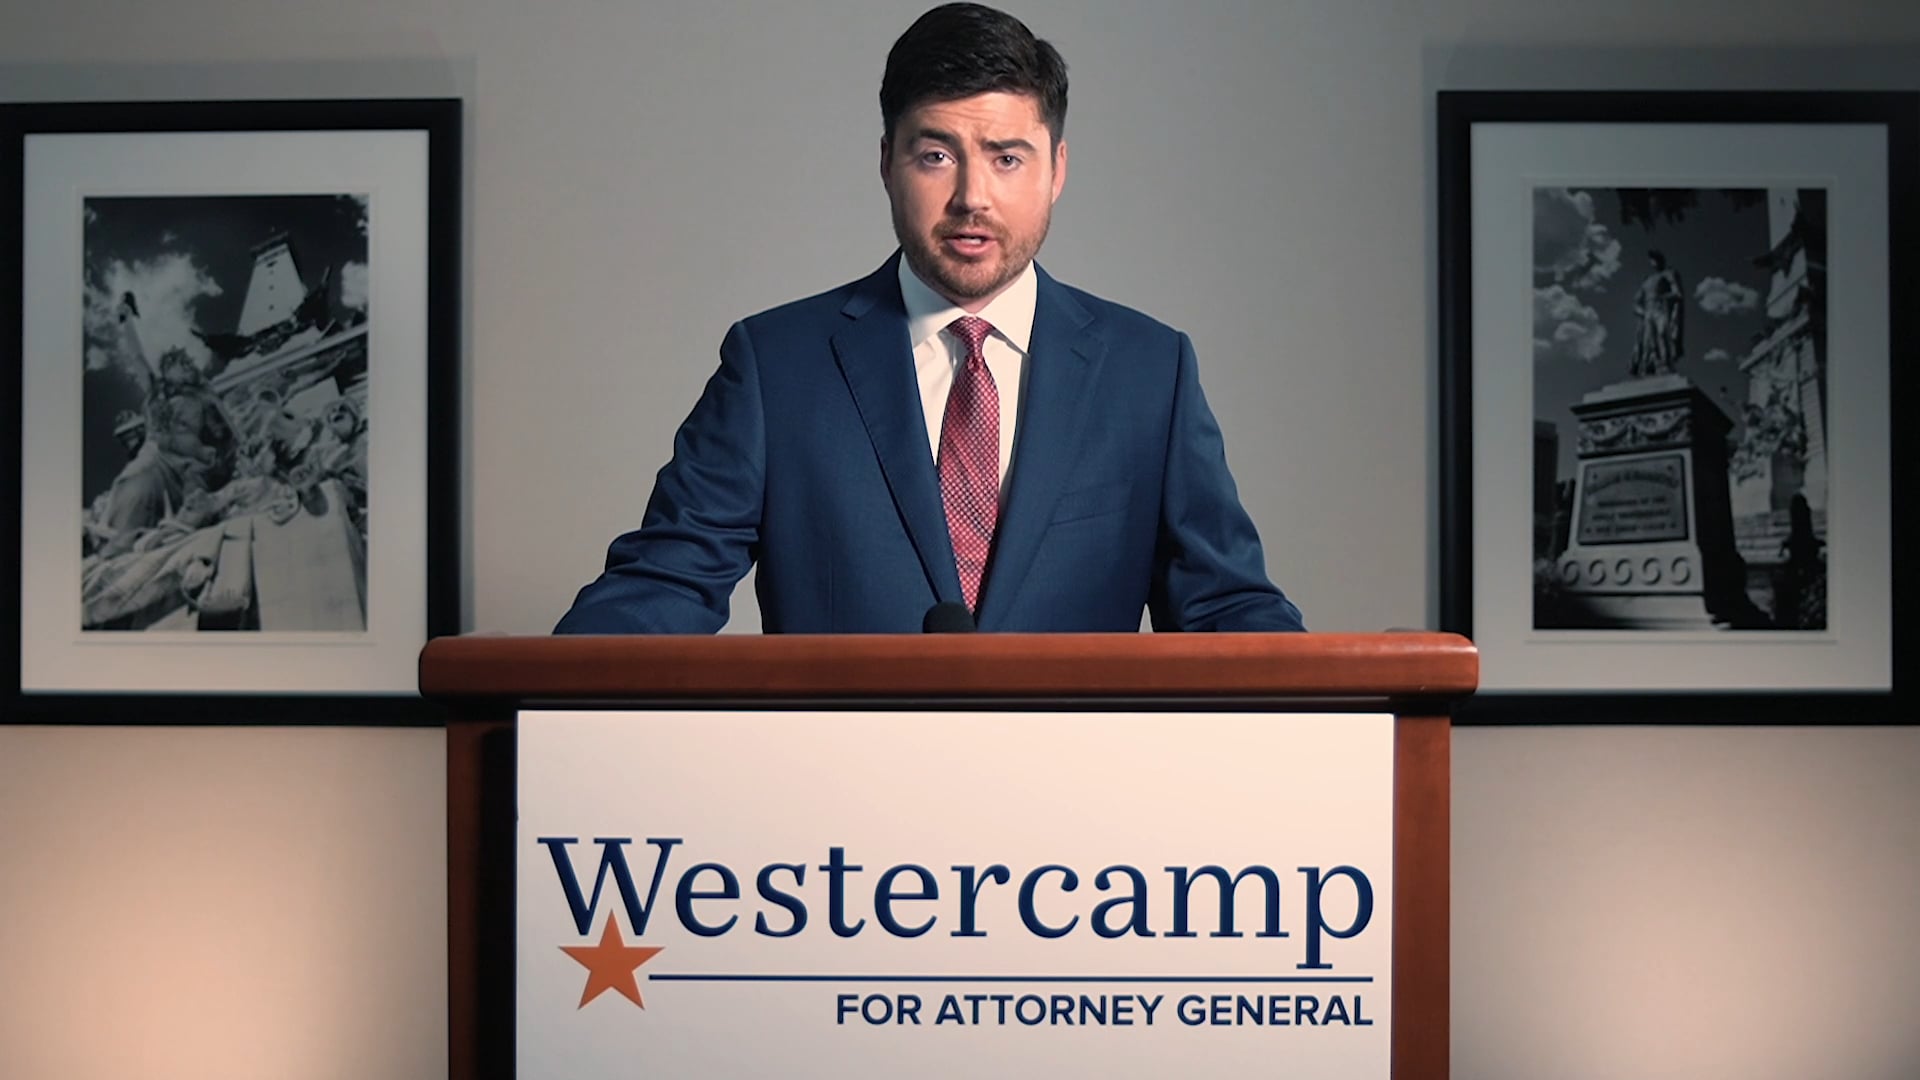 Westercamp For Attorney General